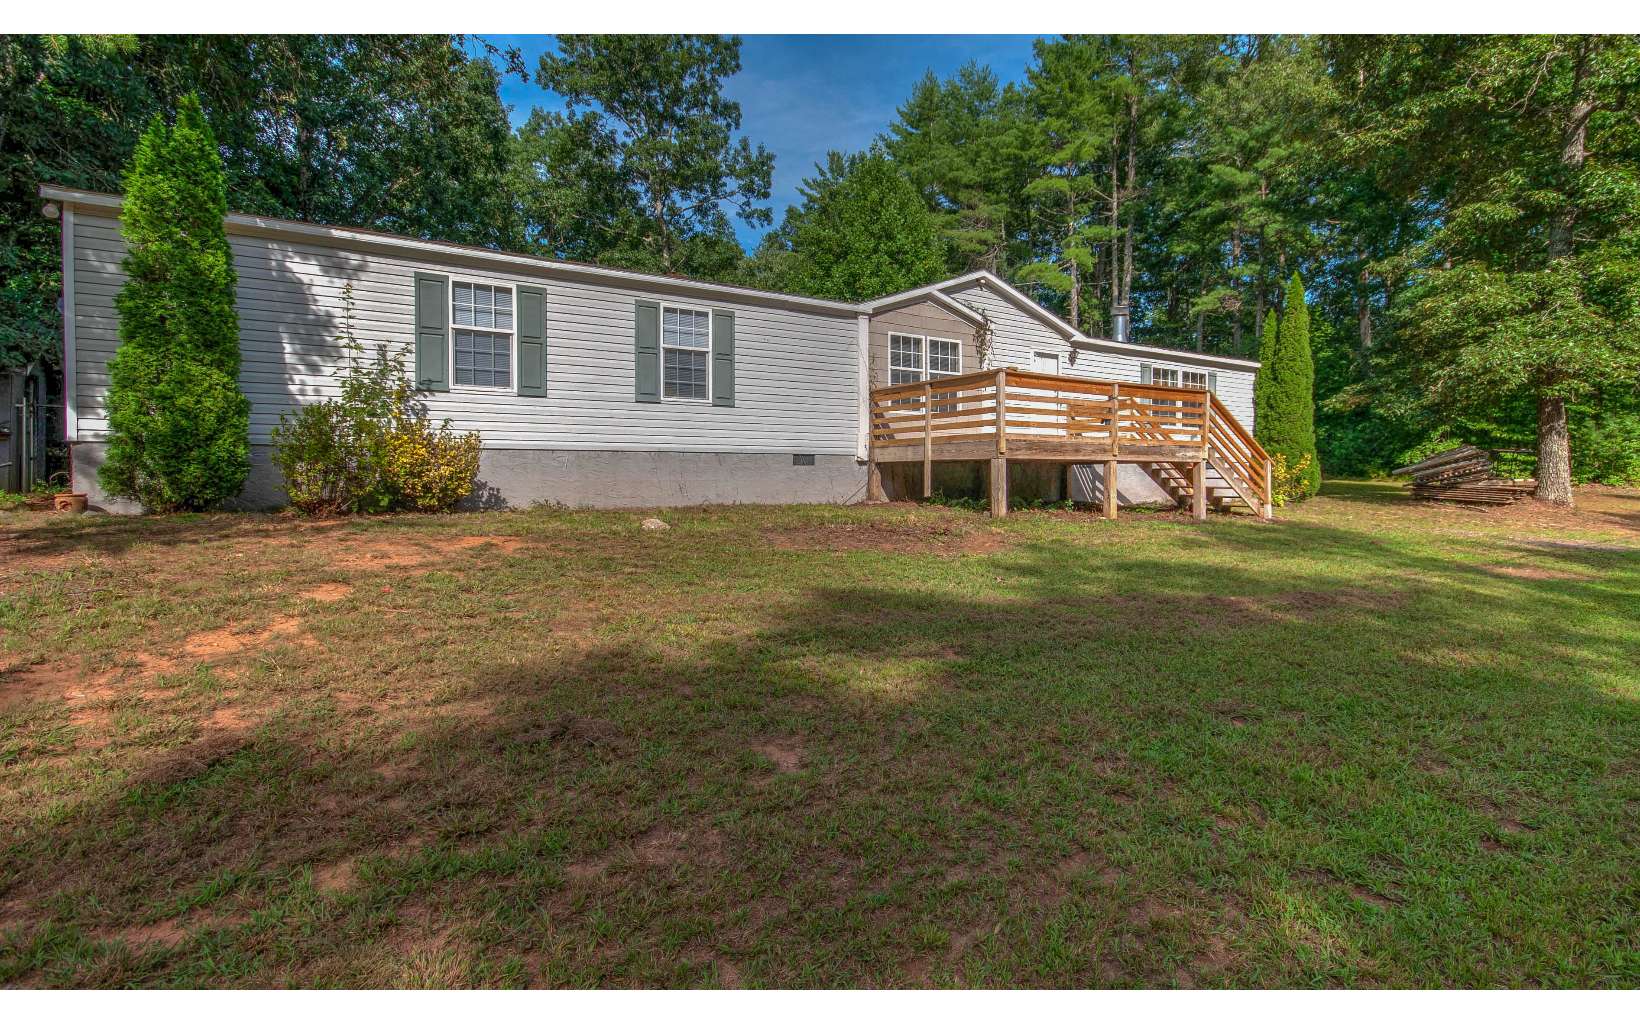 134 OLD FORGE ROAD, Murphy, NC 28906